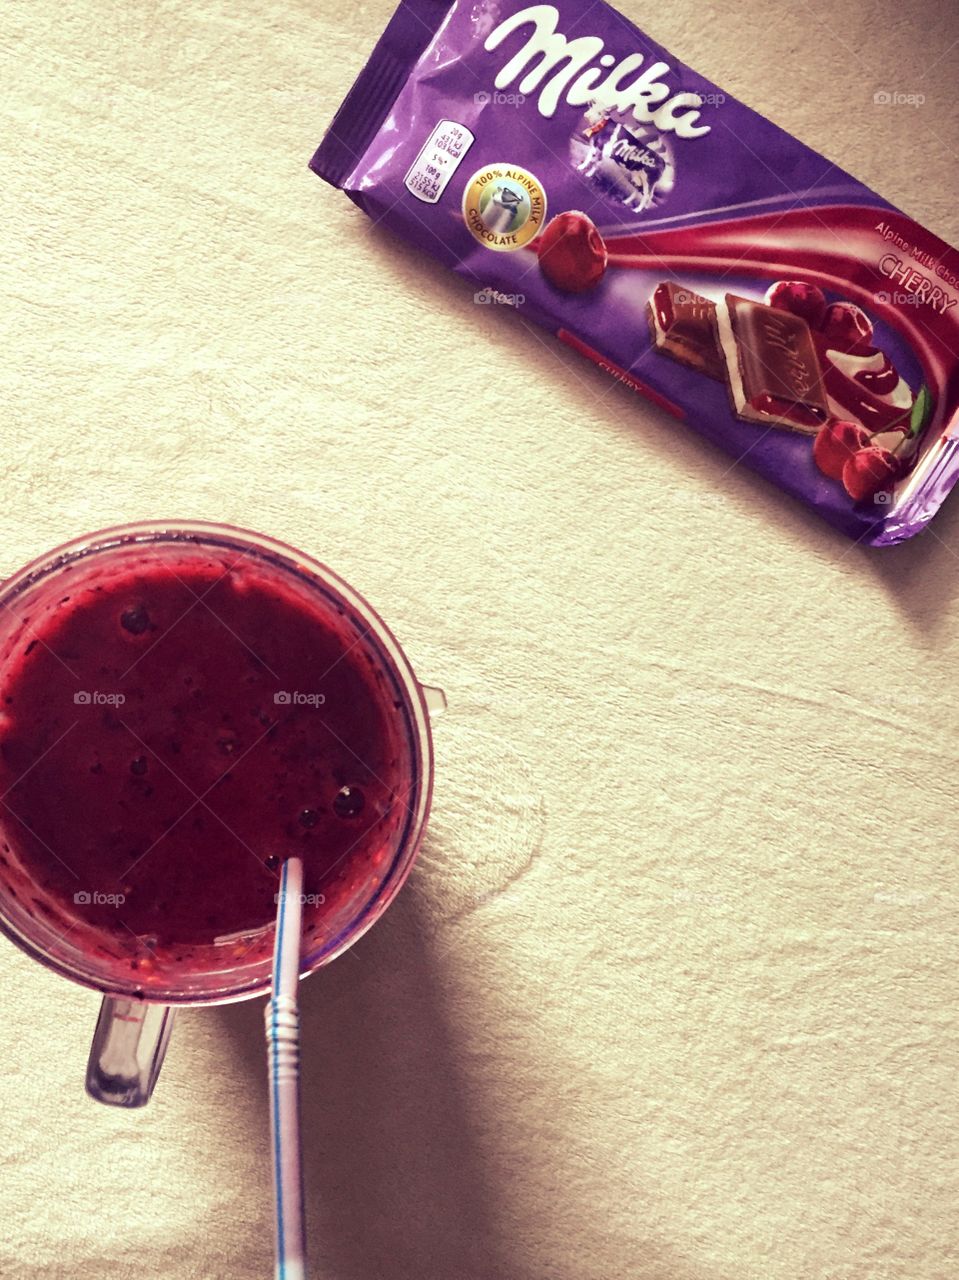 Milka and smoothie